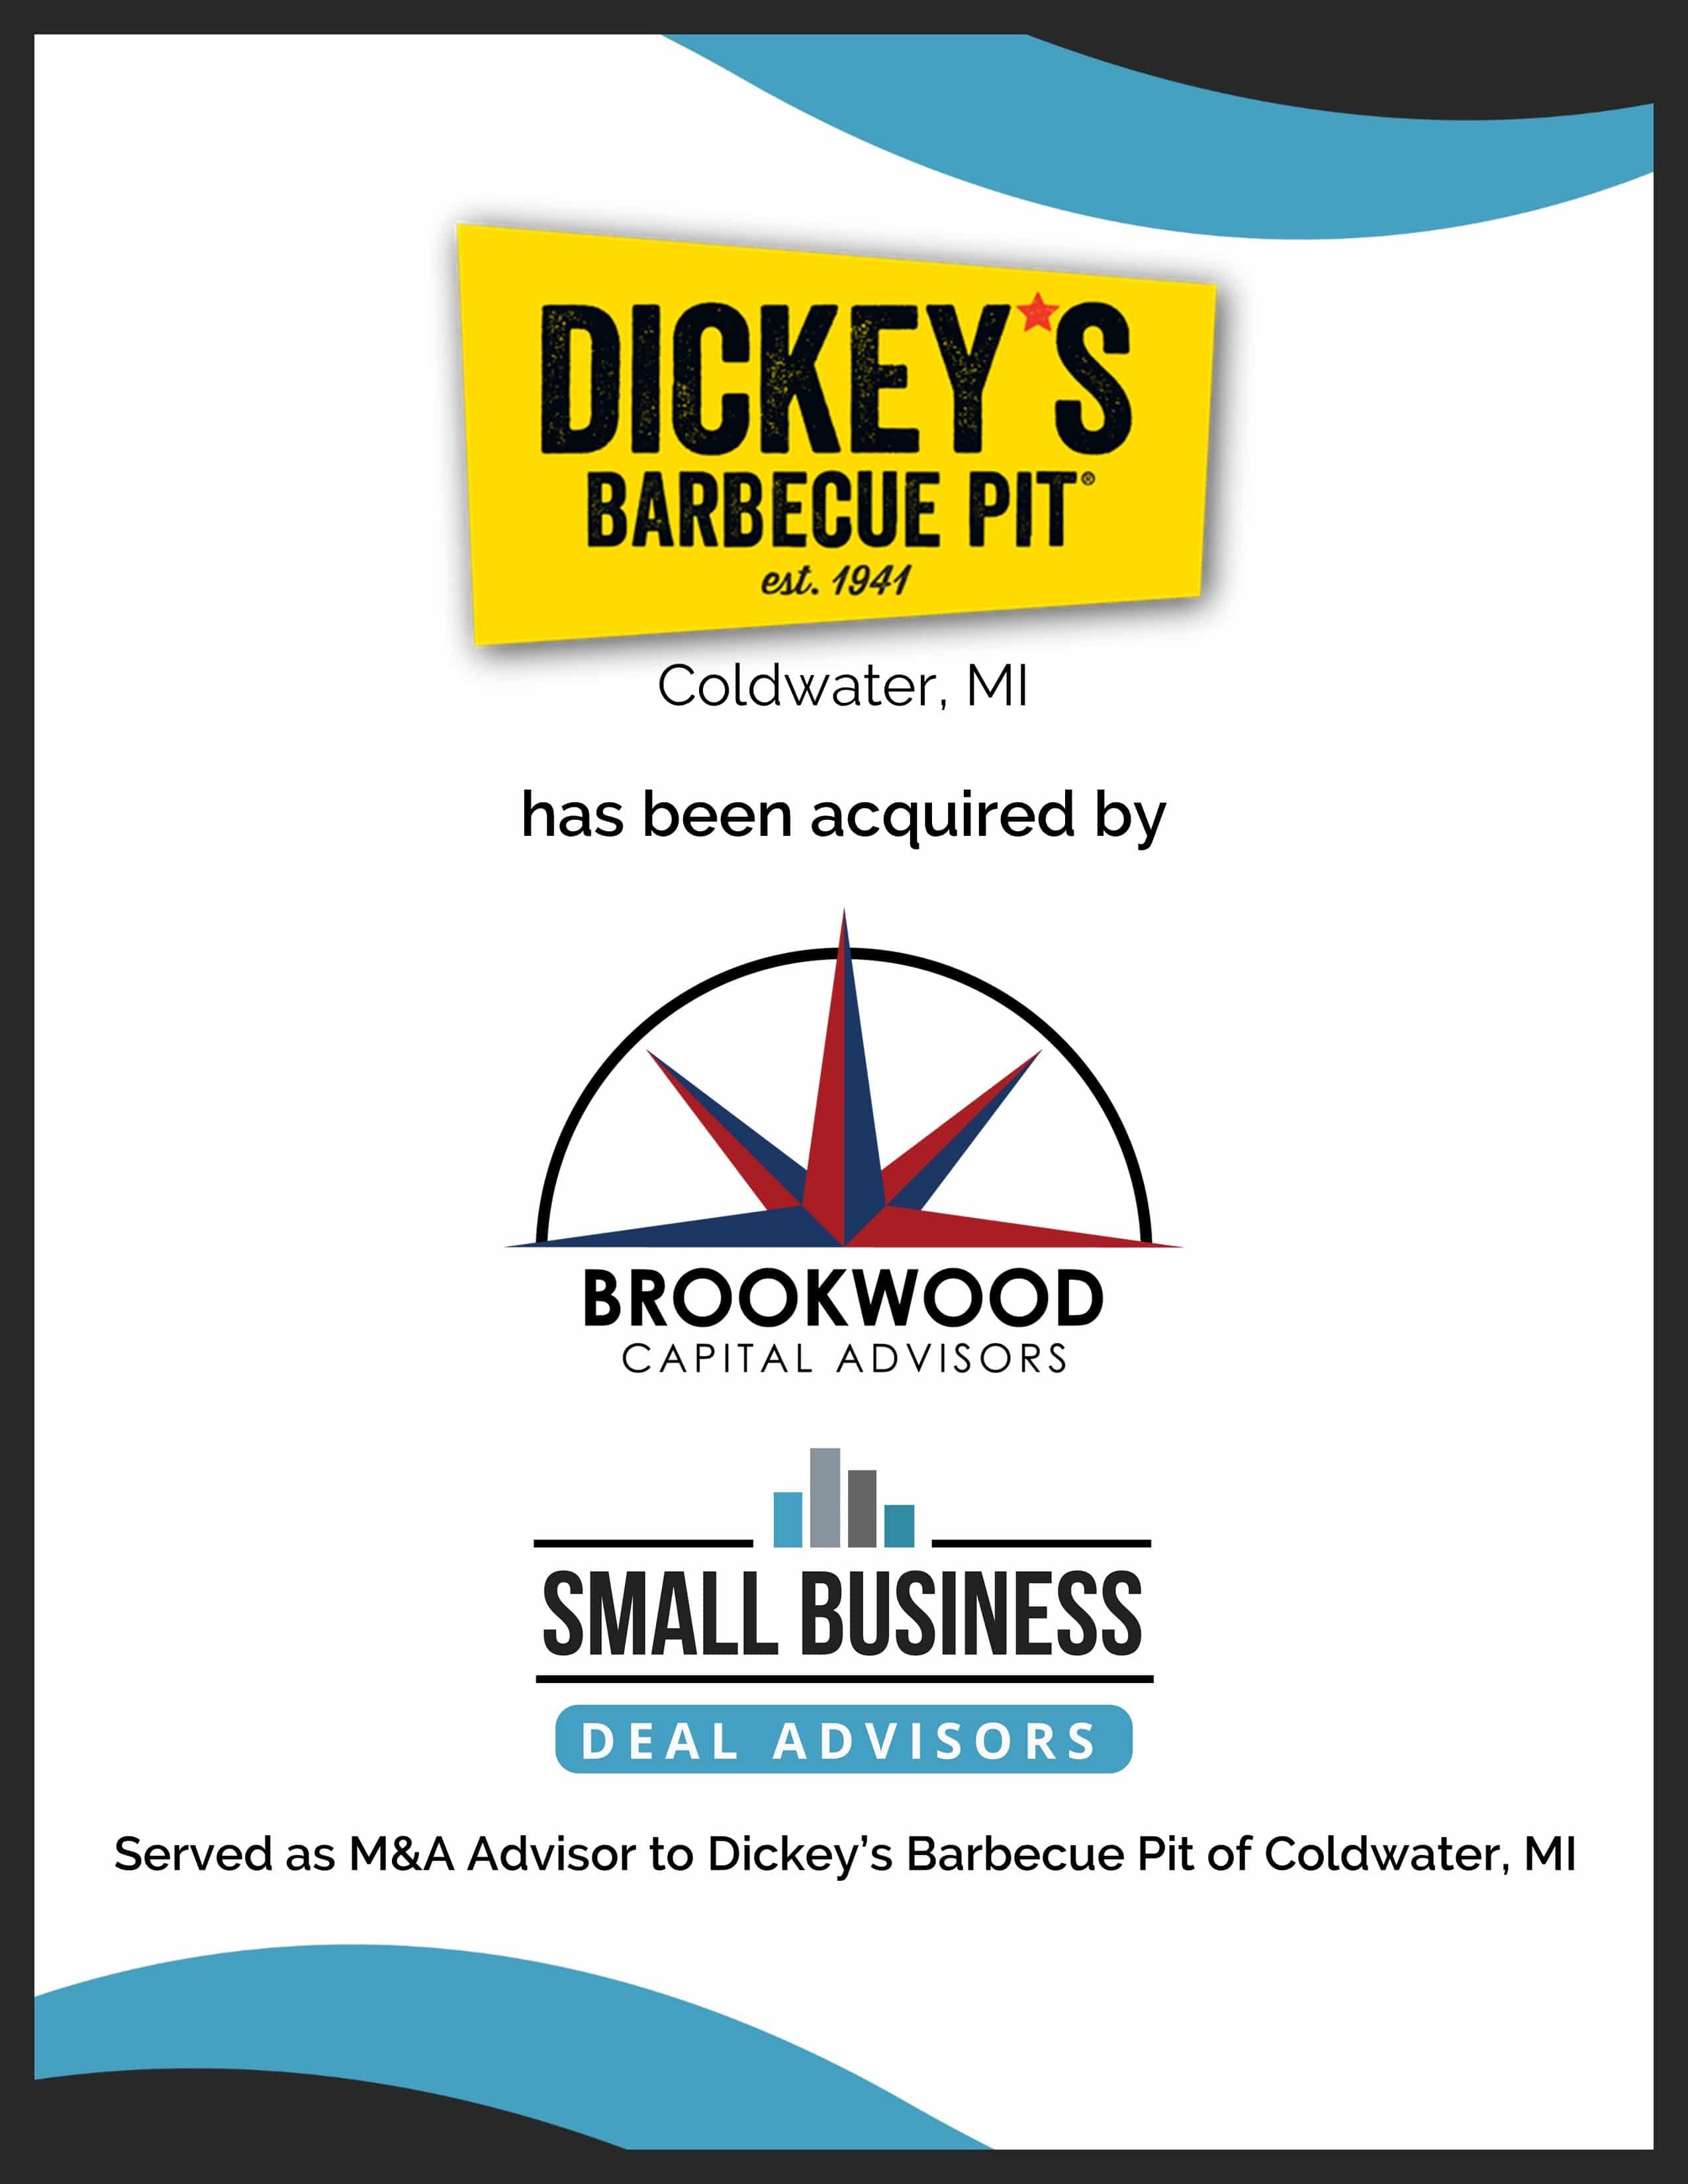 Dickey's Barbecue Pit of Coldwater MI Acquired by Brookwood Capital Advisors